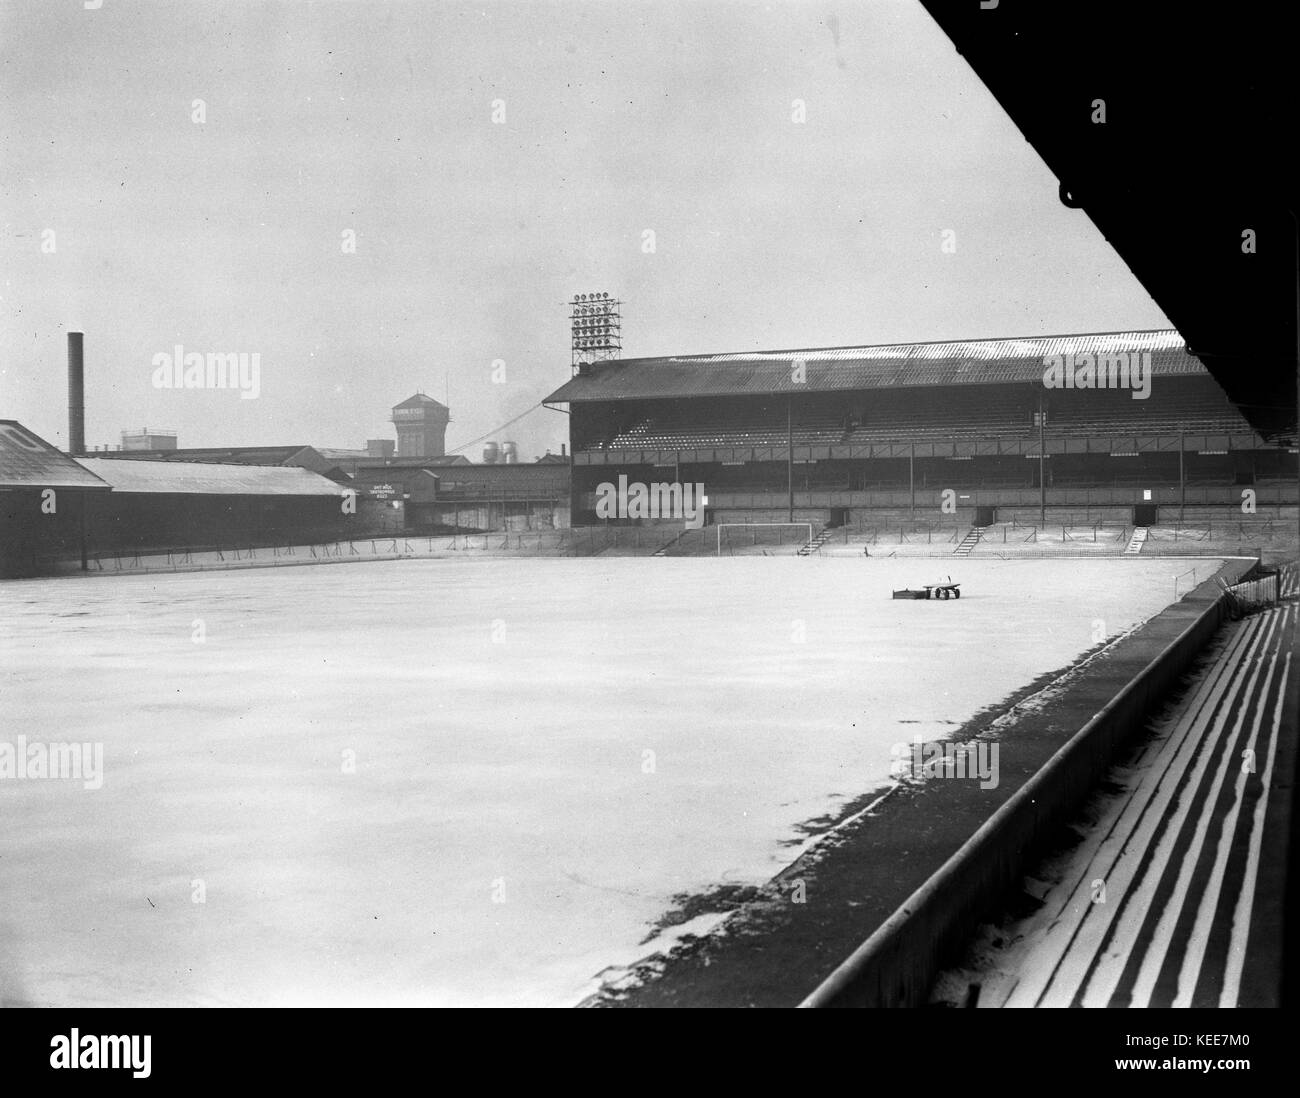 Derby County Football Club stadium from 1895 to 1997 - The Baseball Ground - under snow on 22 January 1963.    Photograph by Tony Henshaw  *** Local Caption *** From the wholly-owned original negative. Stock Photo